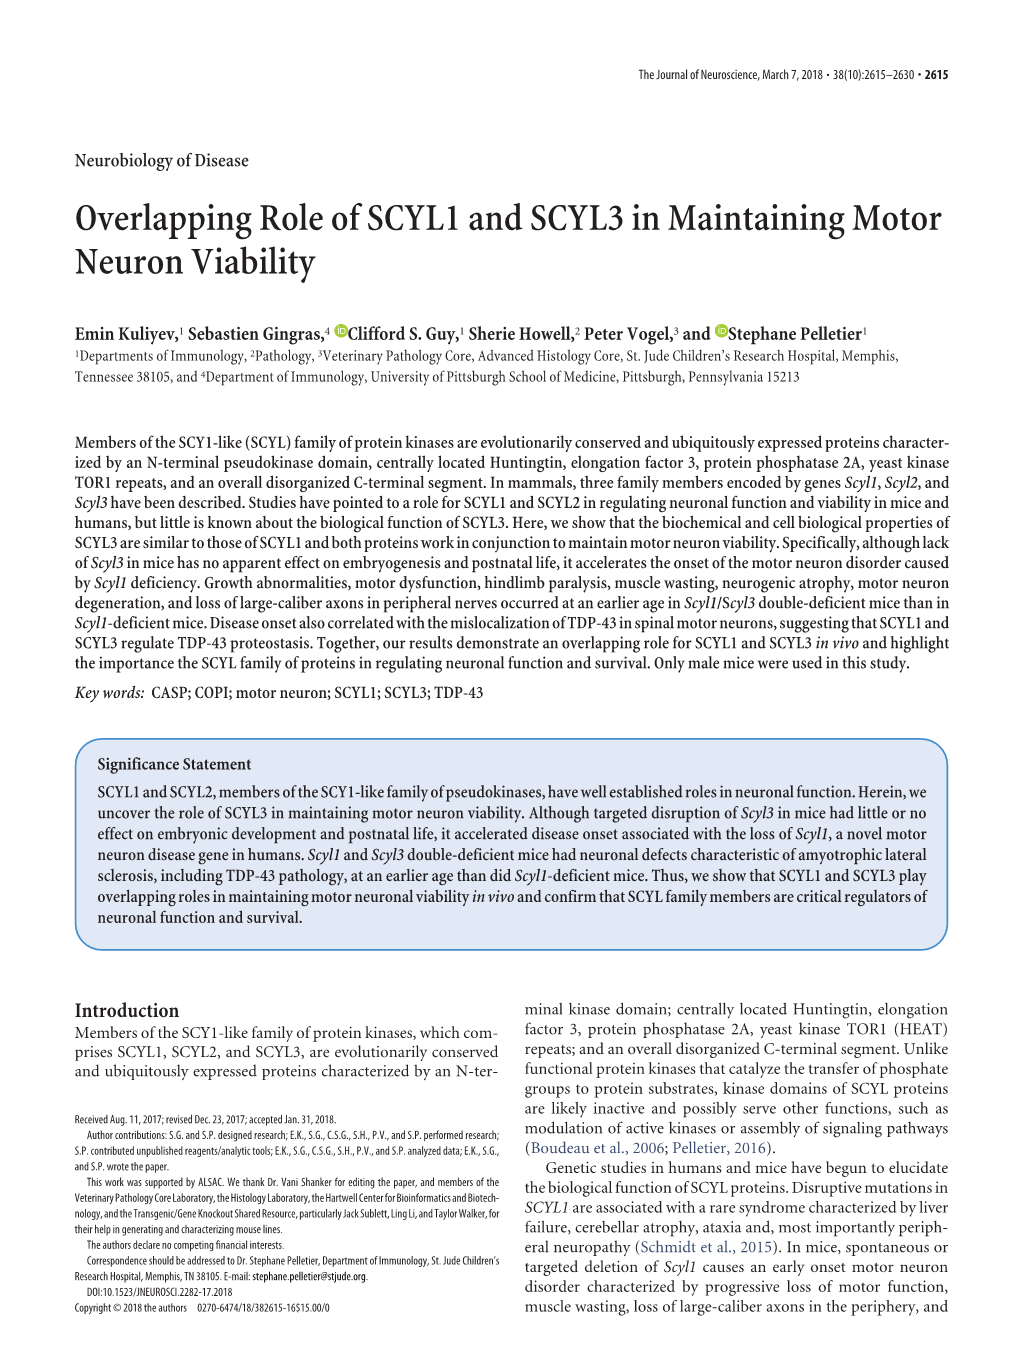 Overlapping Role of SCYL1 and SCYL3 in Maintaining Motor Neuron Viability